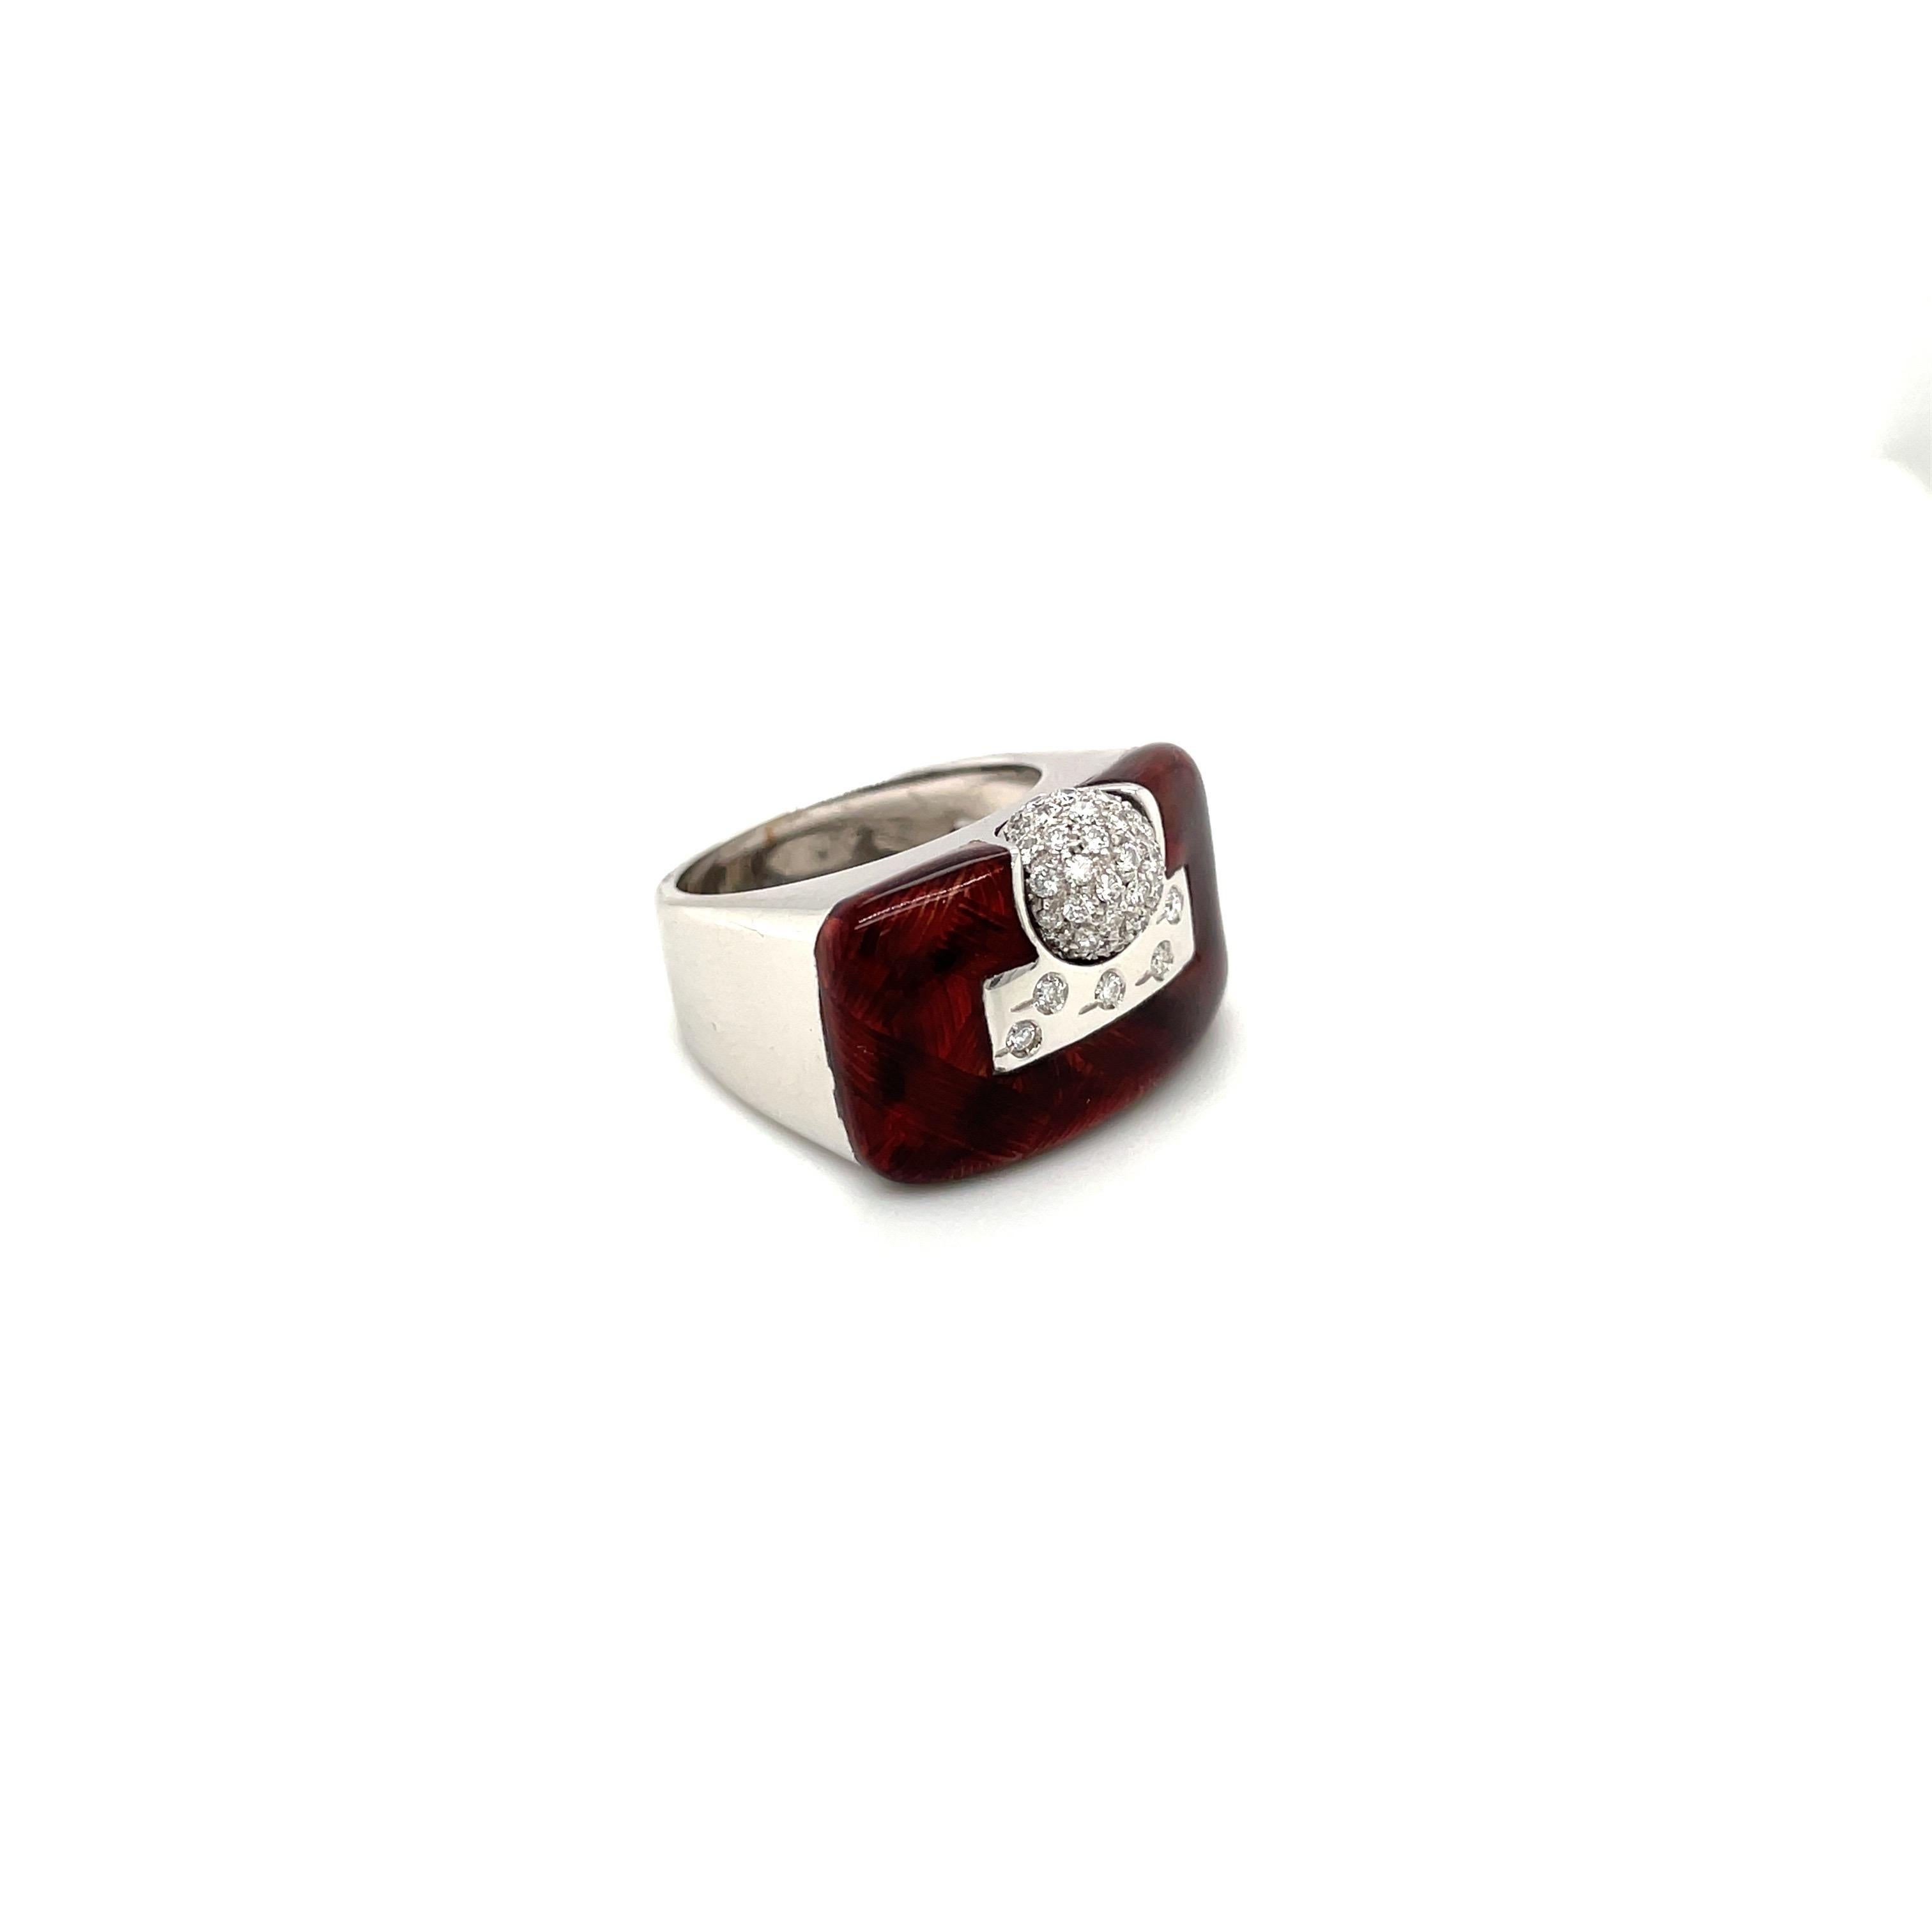 This 18 karat white and  gold ring is designed by the world renowned Italian company La Nouvelle Bague. They are known for their exquisite craftsmanship, marrying the classic with the modern.
This ring is designed in a high polished white gold. The